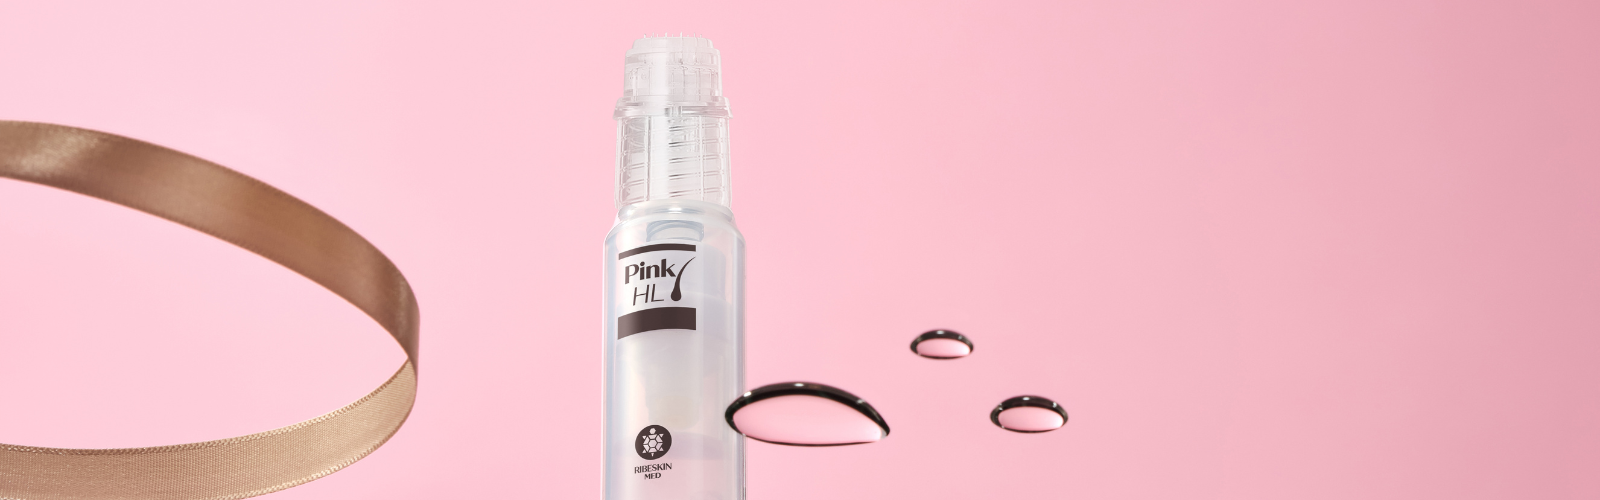 Maintaining Scalp Health with Pink HL